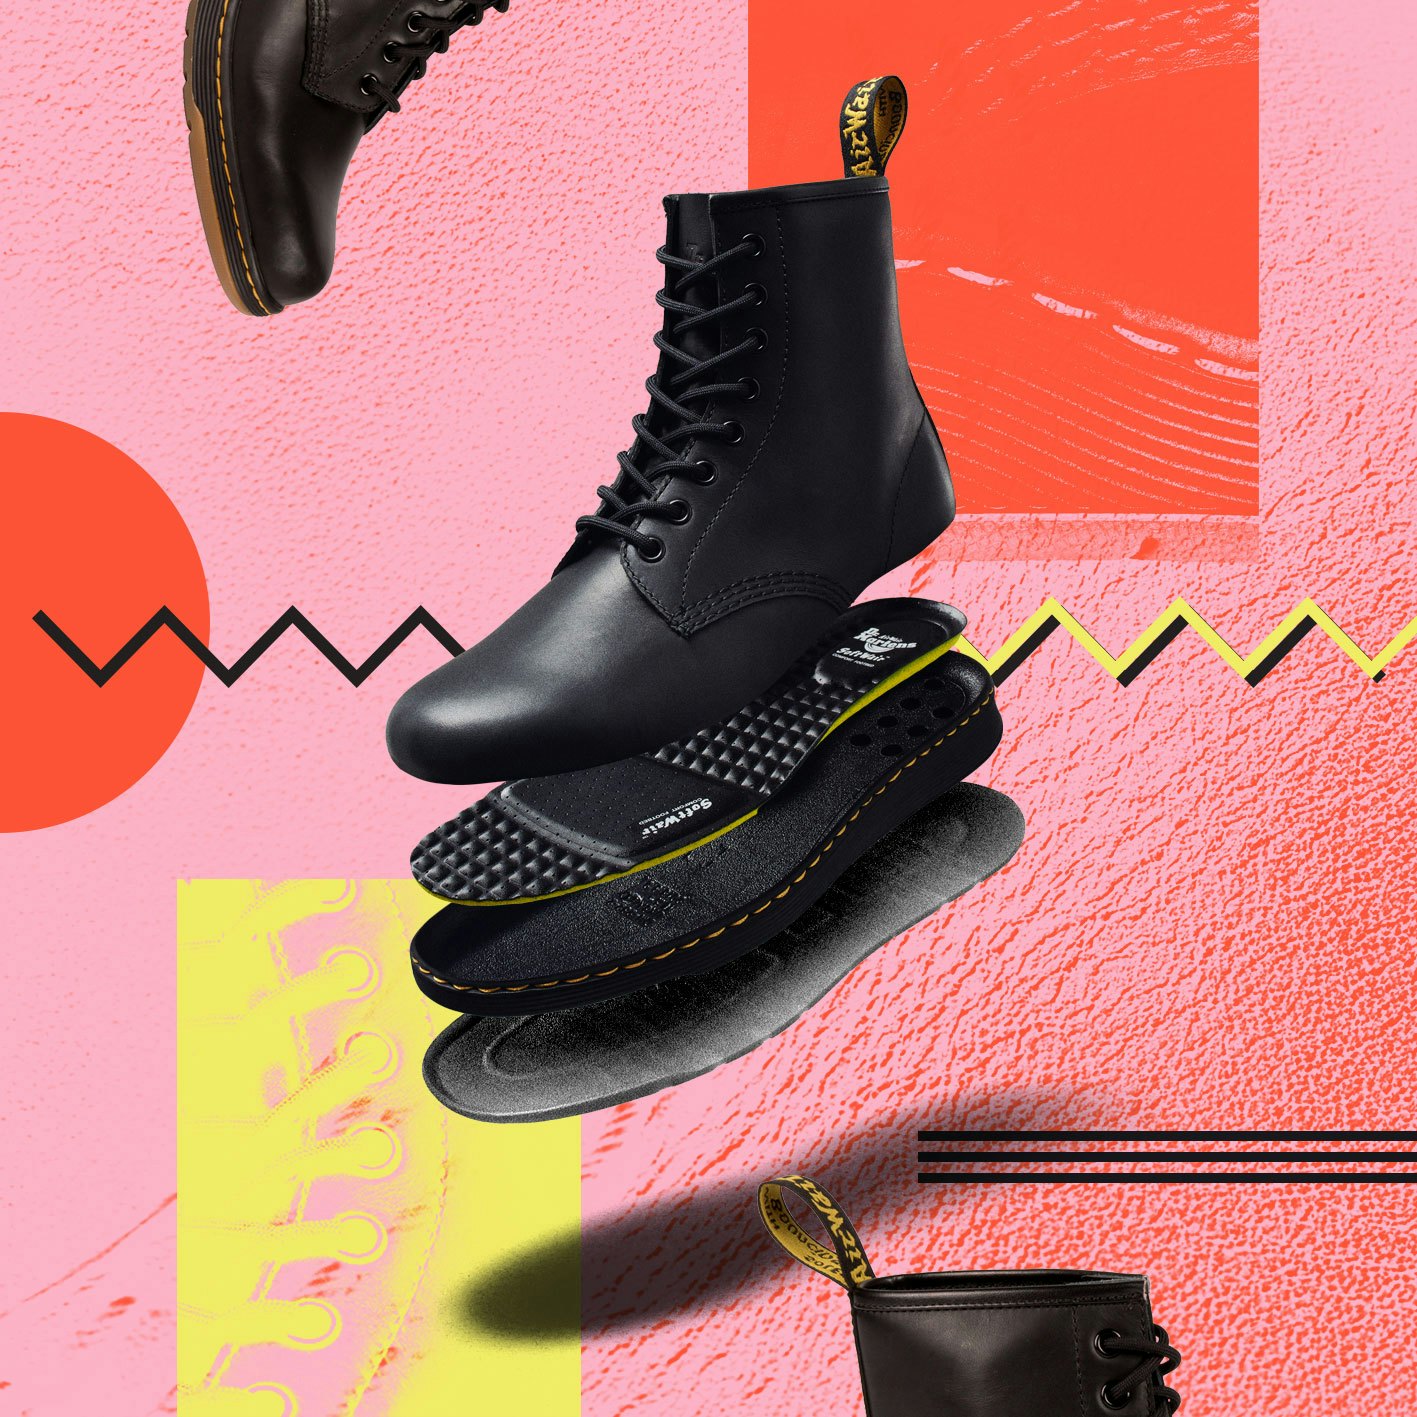 Dr. Martens Just Revolutionized The New 